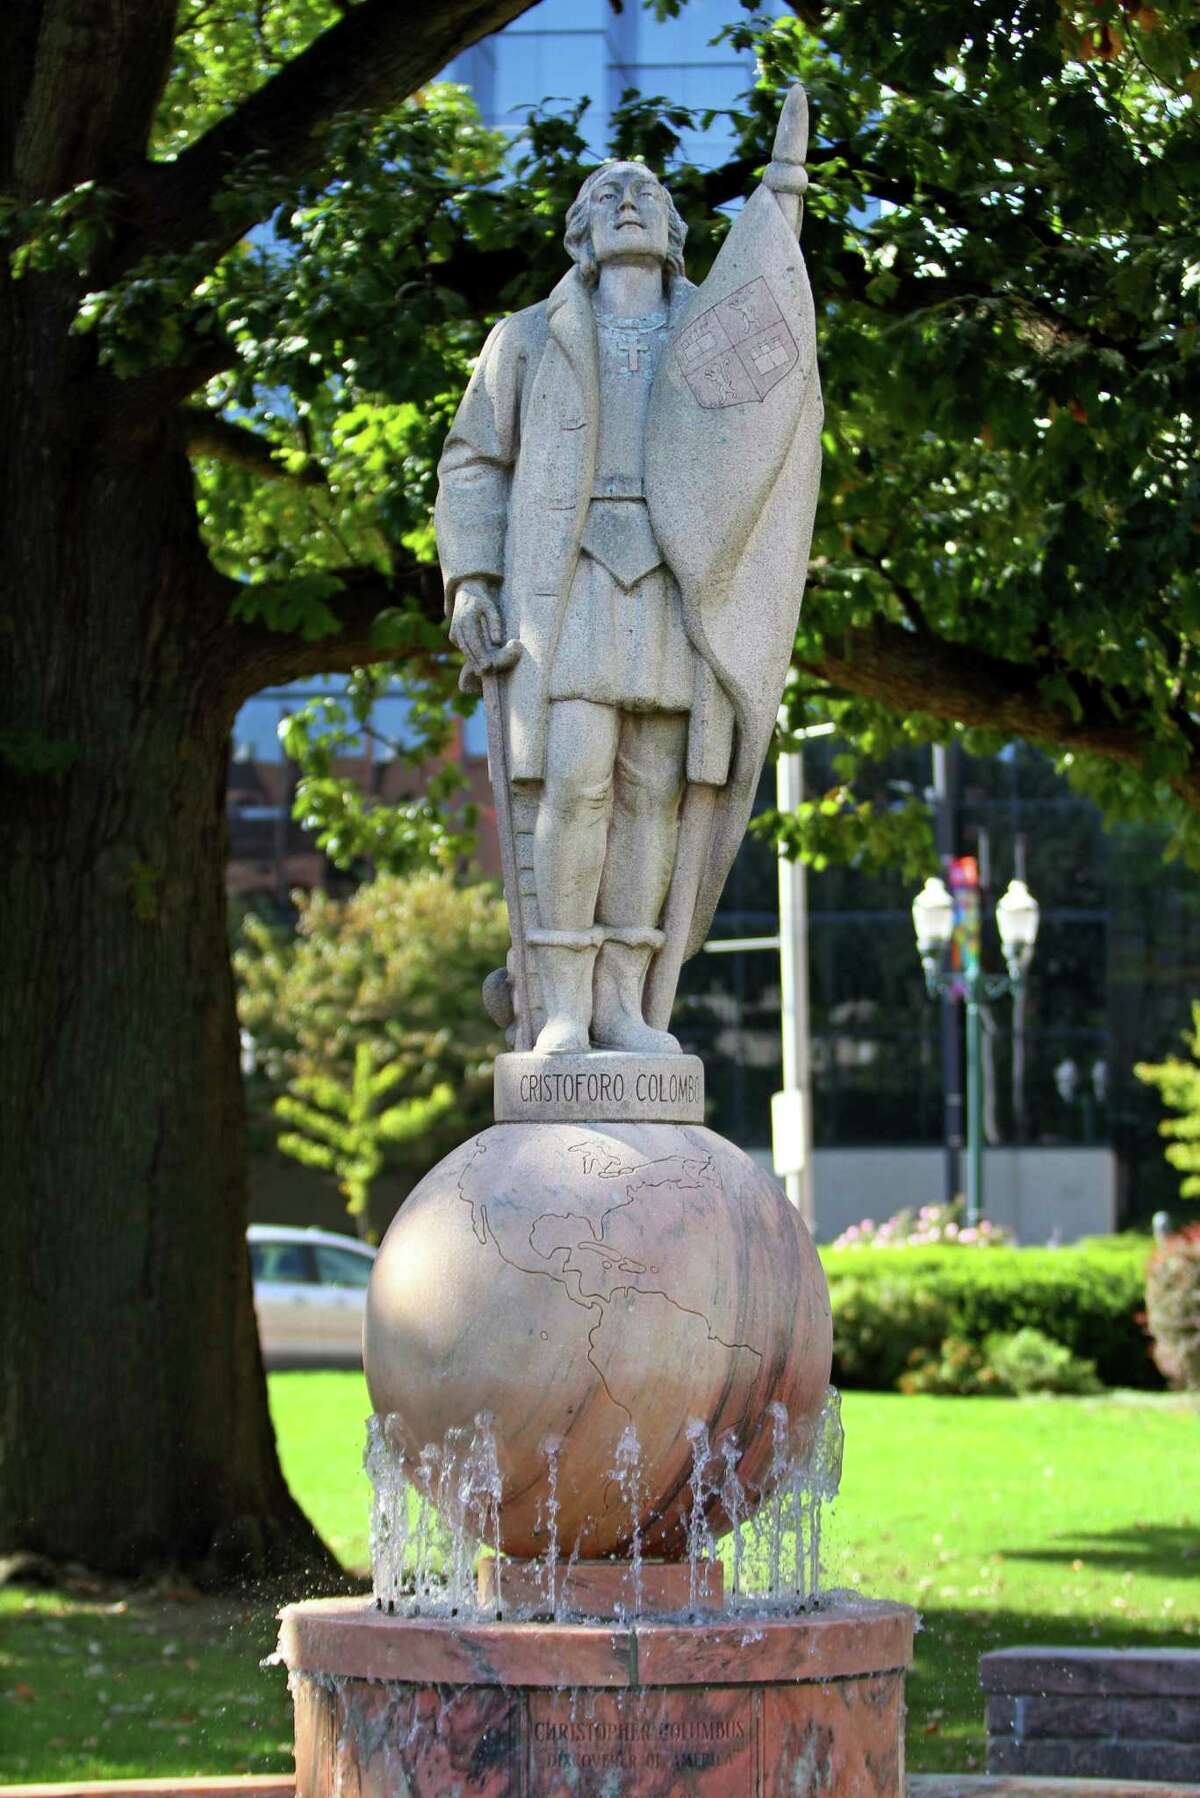 A view of the Christopher Columbus statue at Columbus Park in Stamford, Conn., on Thursday October 7, 2021. A local Italian organization is planning a small event at the statue on Columbus Day, but the city is still not sure if it will be removed or not.